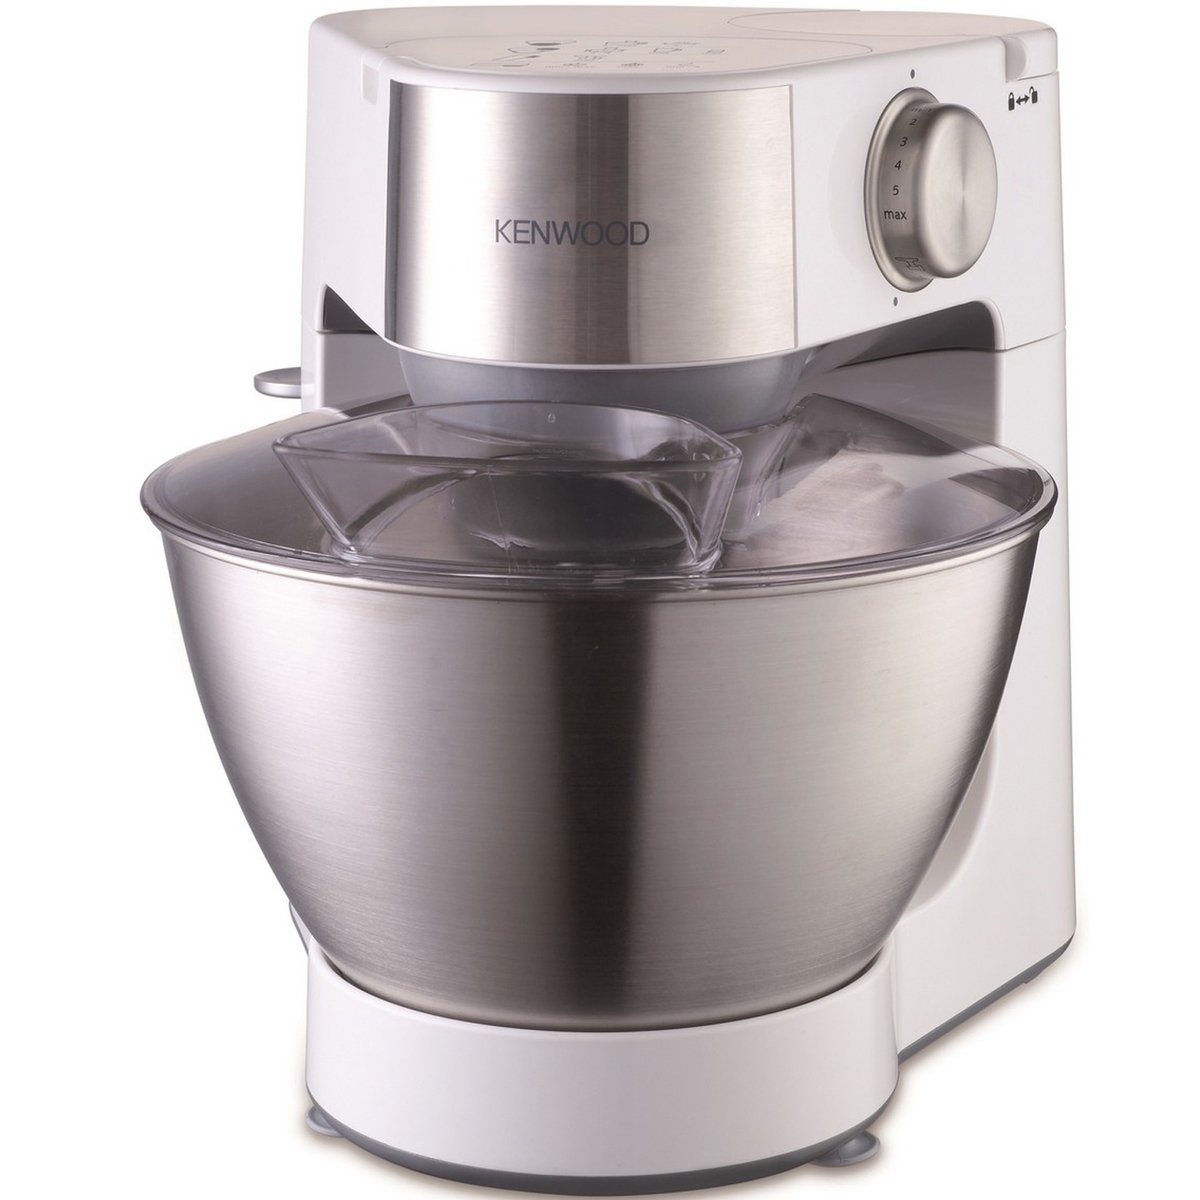 Kenwood Stand Mixer Kitchen Machine PROSPERO 900W with 4.3L Stainless Steel Bowl, K-Beater, Whisk, Dough Hook, Blender, Meat Grinder KM281SI Silver